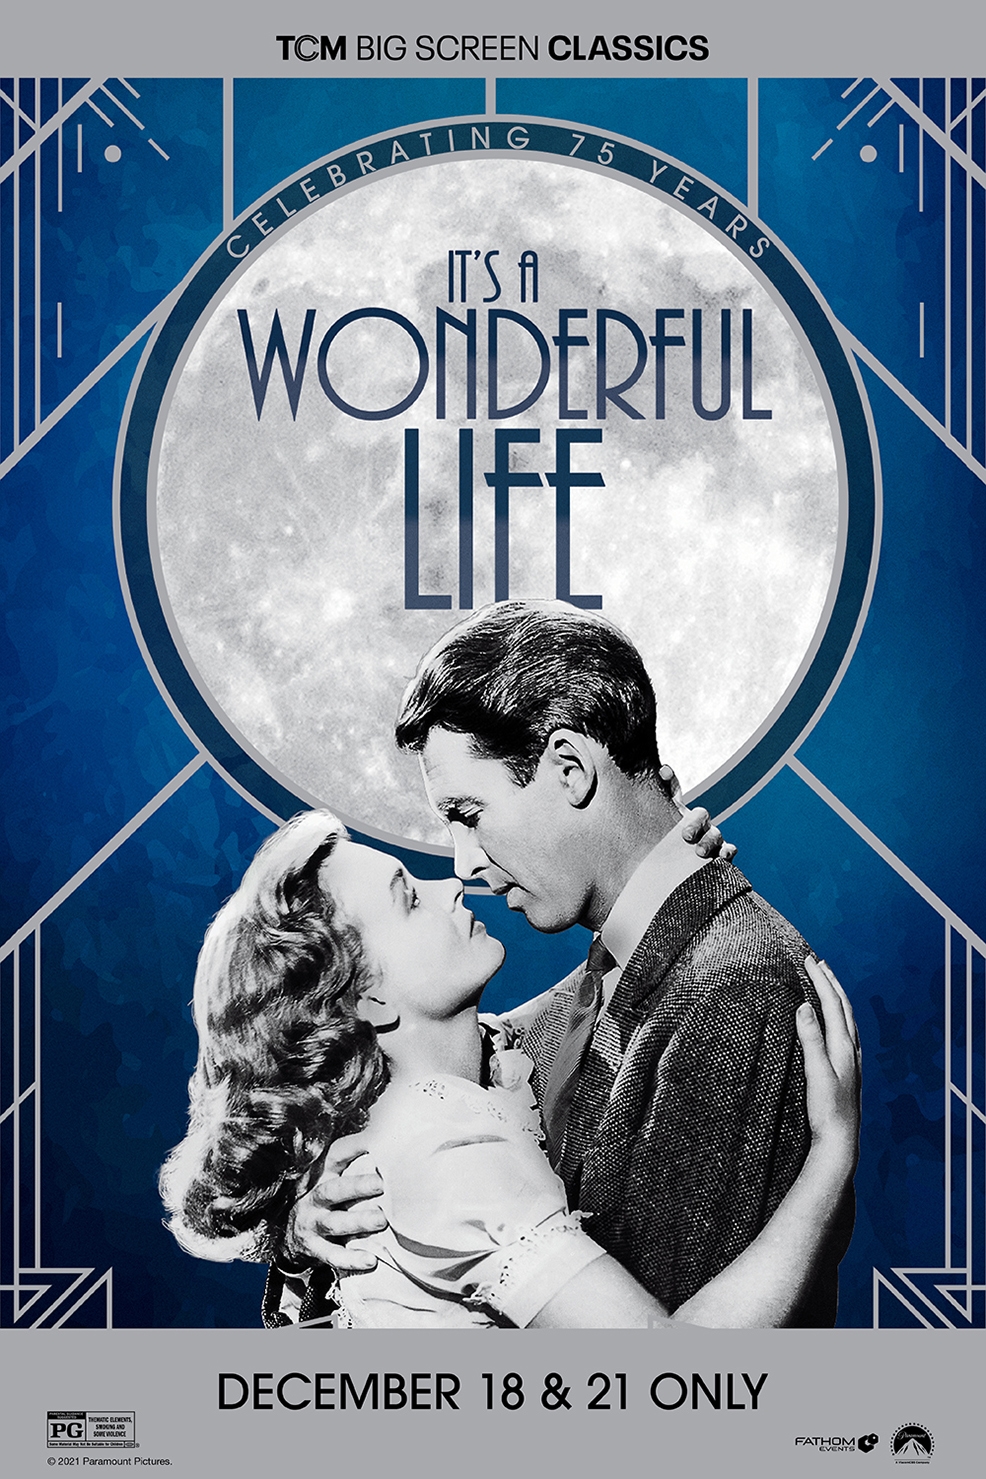 Poster of It's a Wonderful Life 75th Anniversary presented by TCM